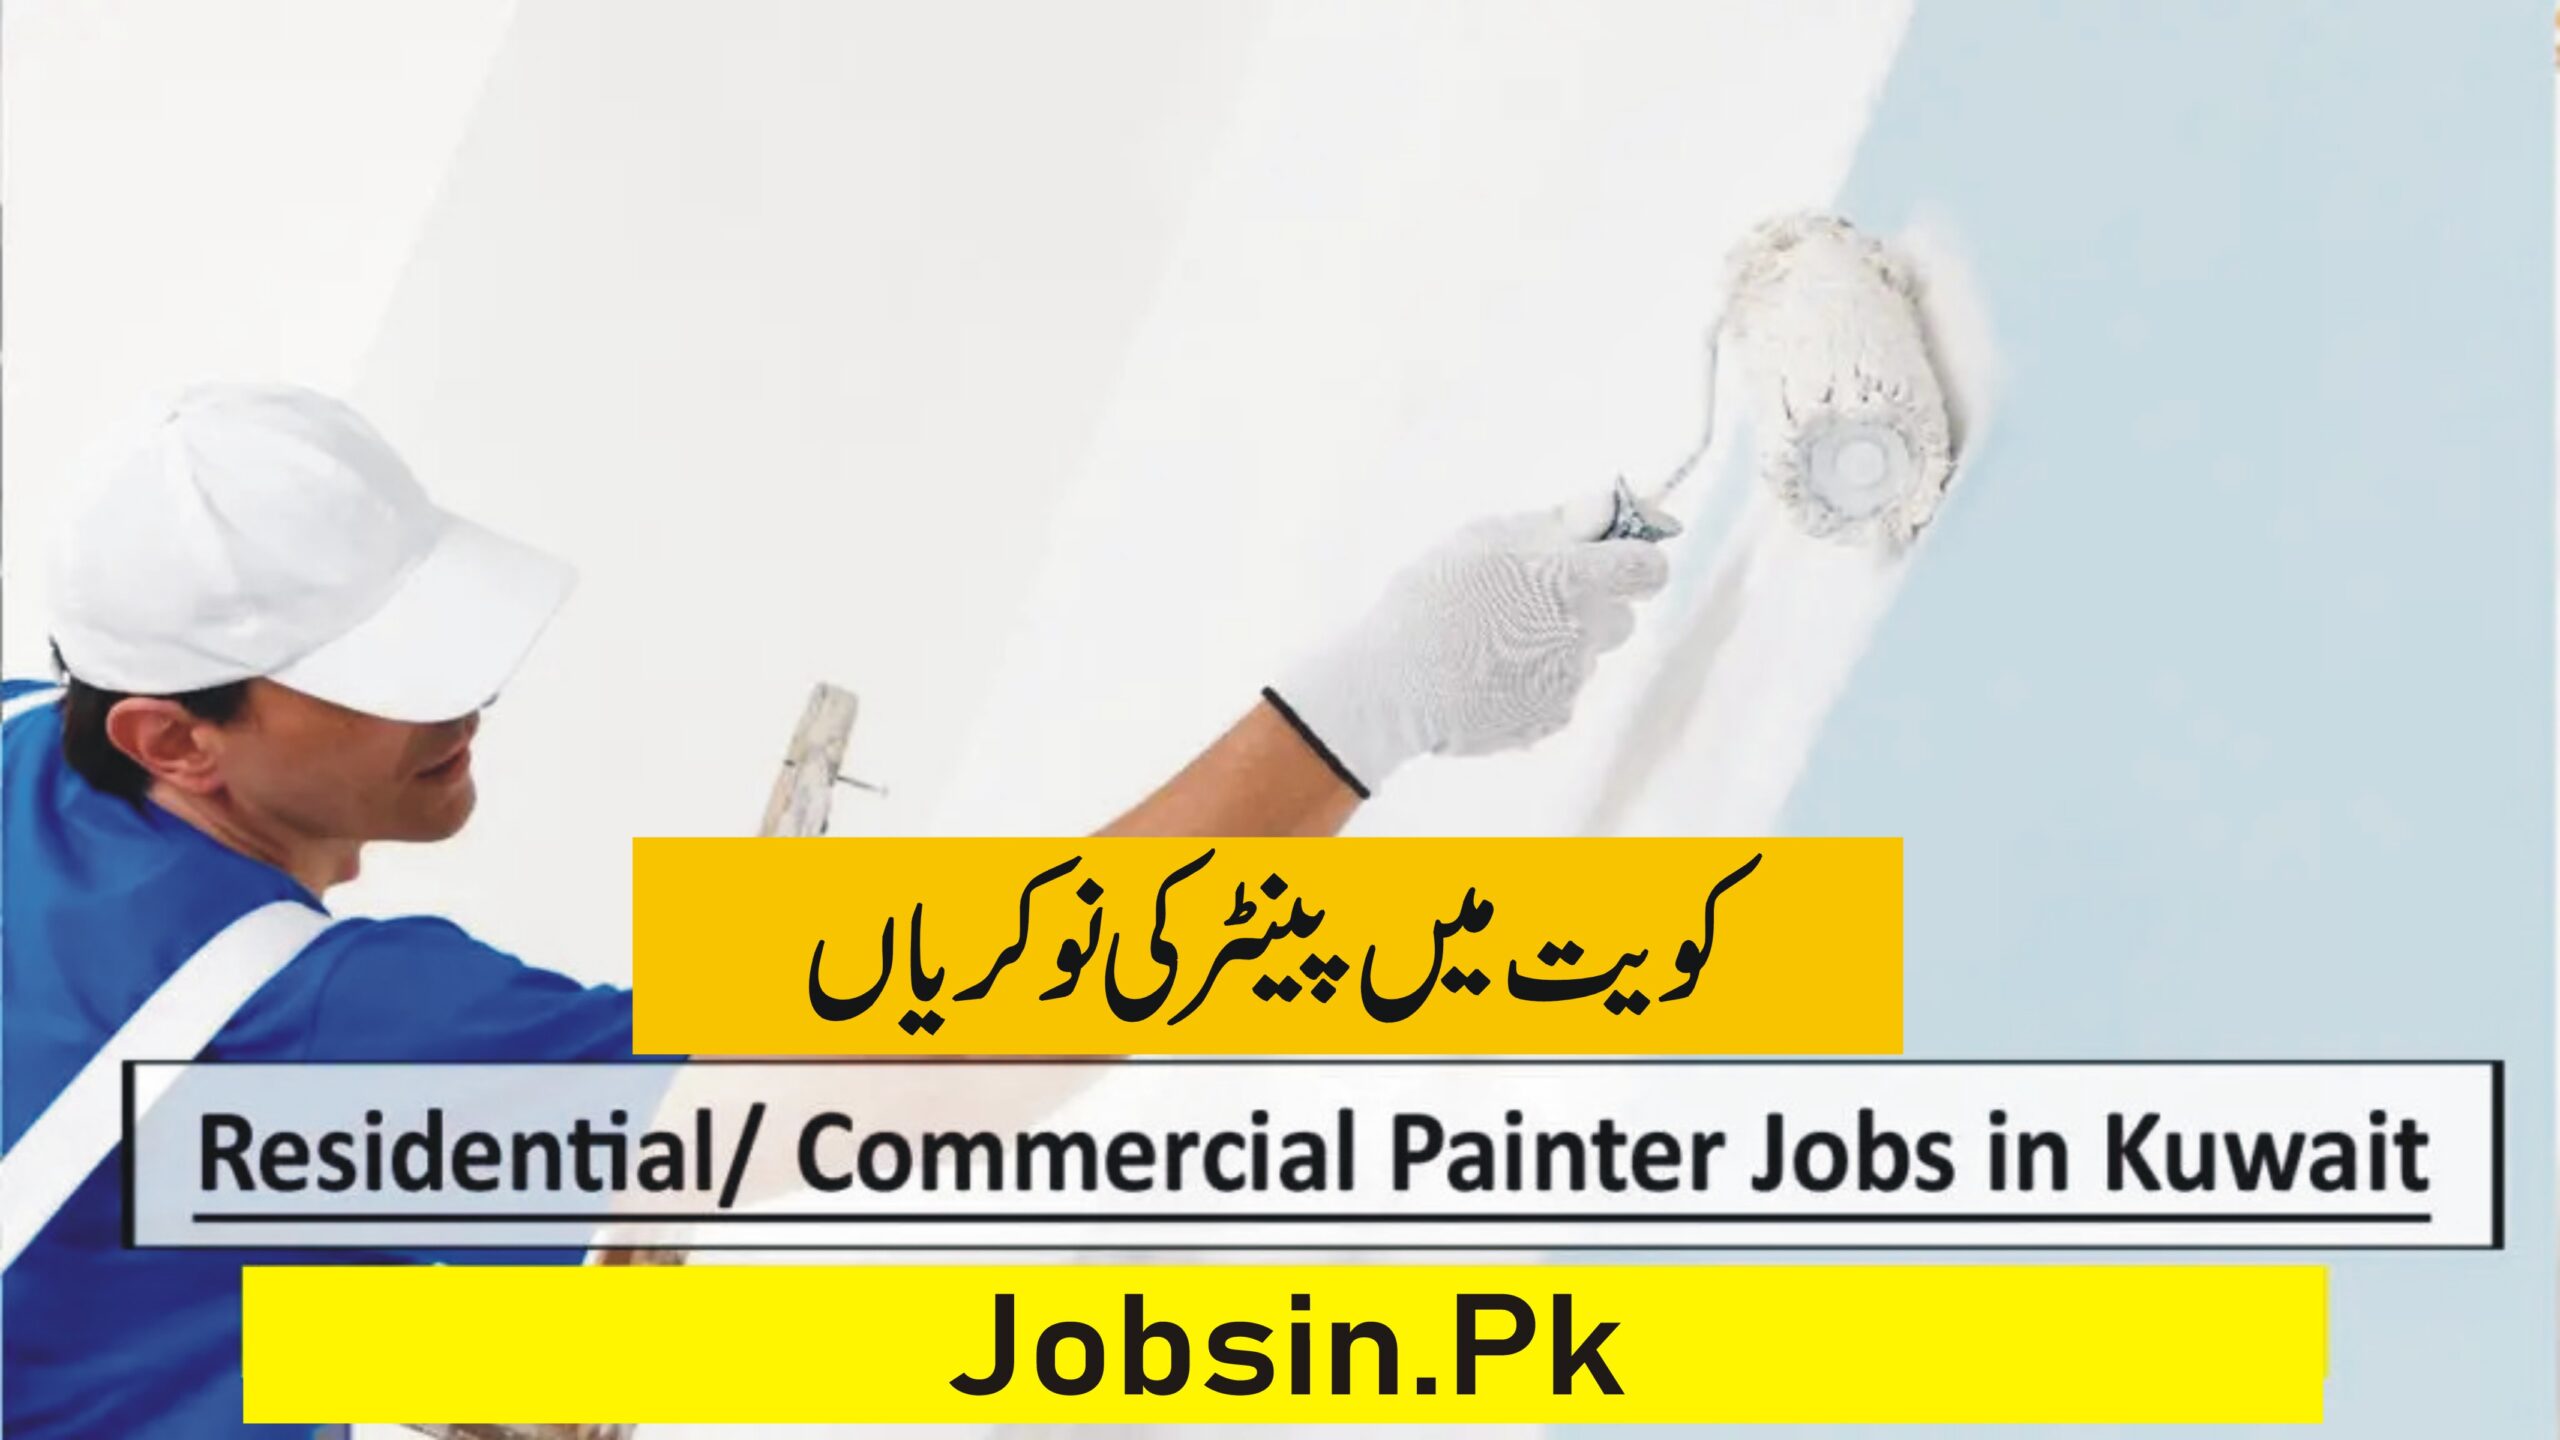 Residential/Commercial Painter Jobs in Kuwait with Visa Sponsorship – Apply Now